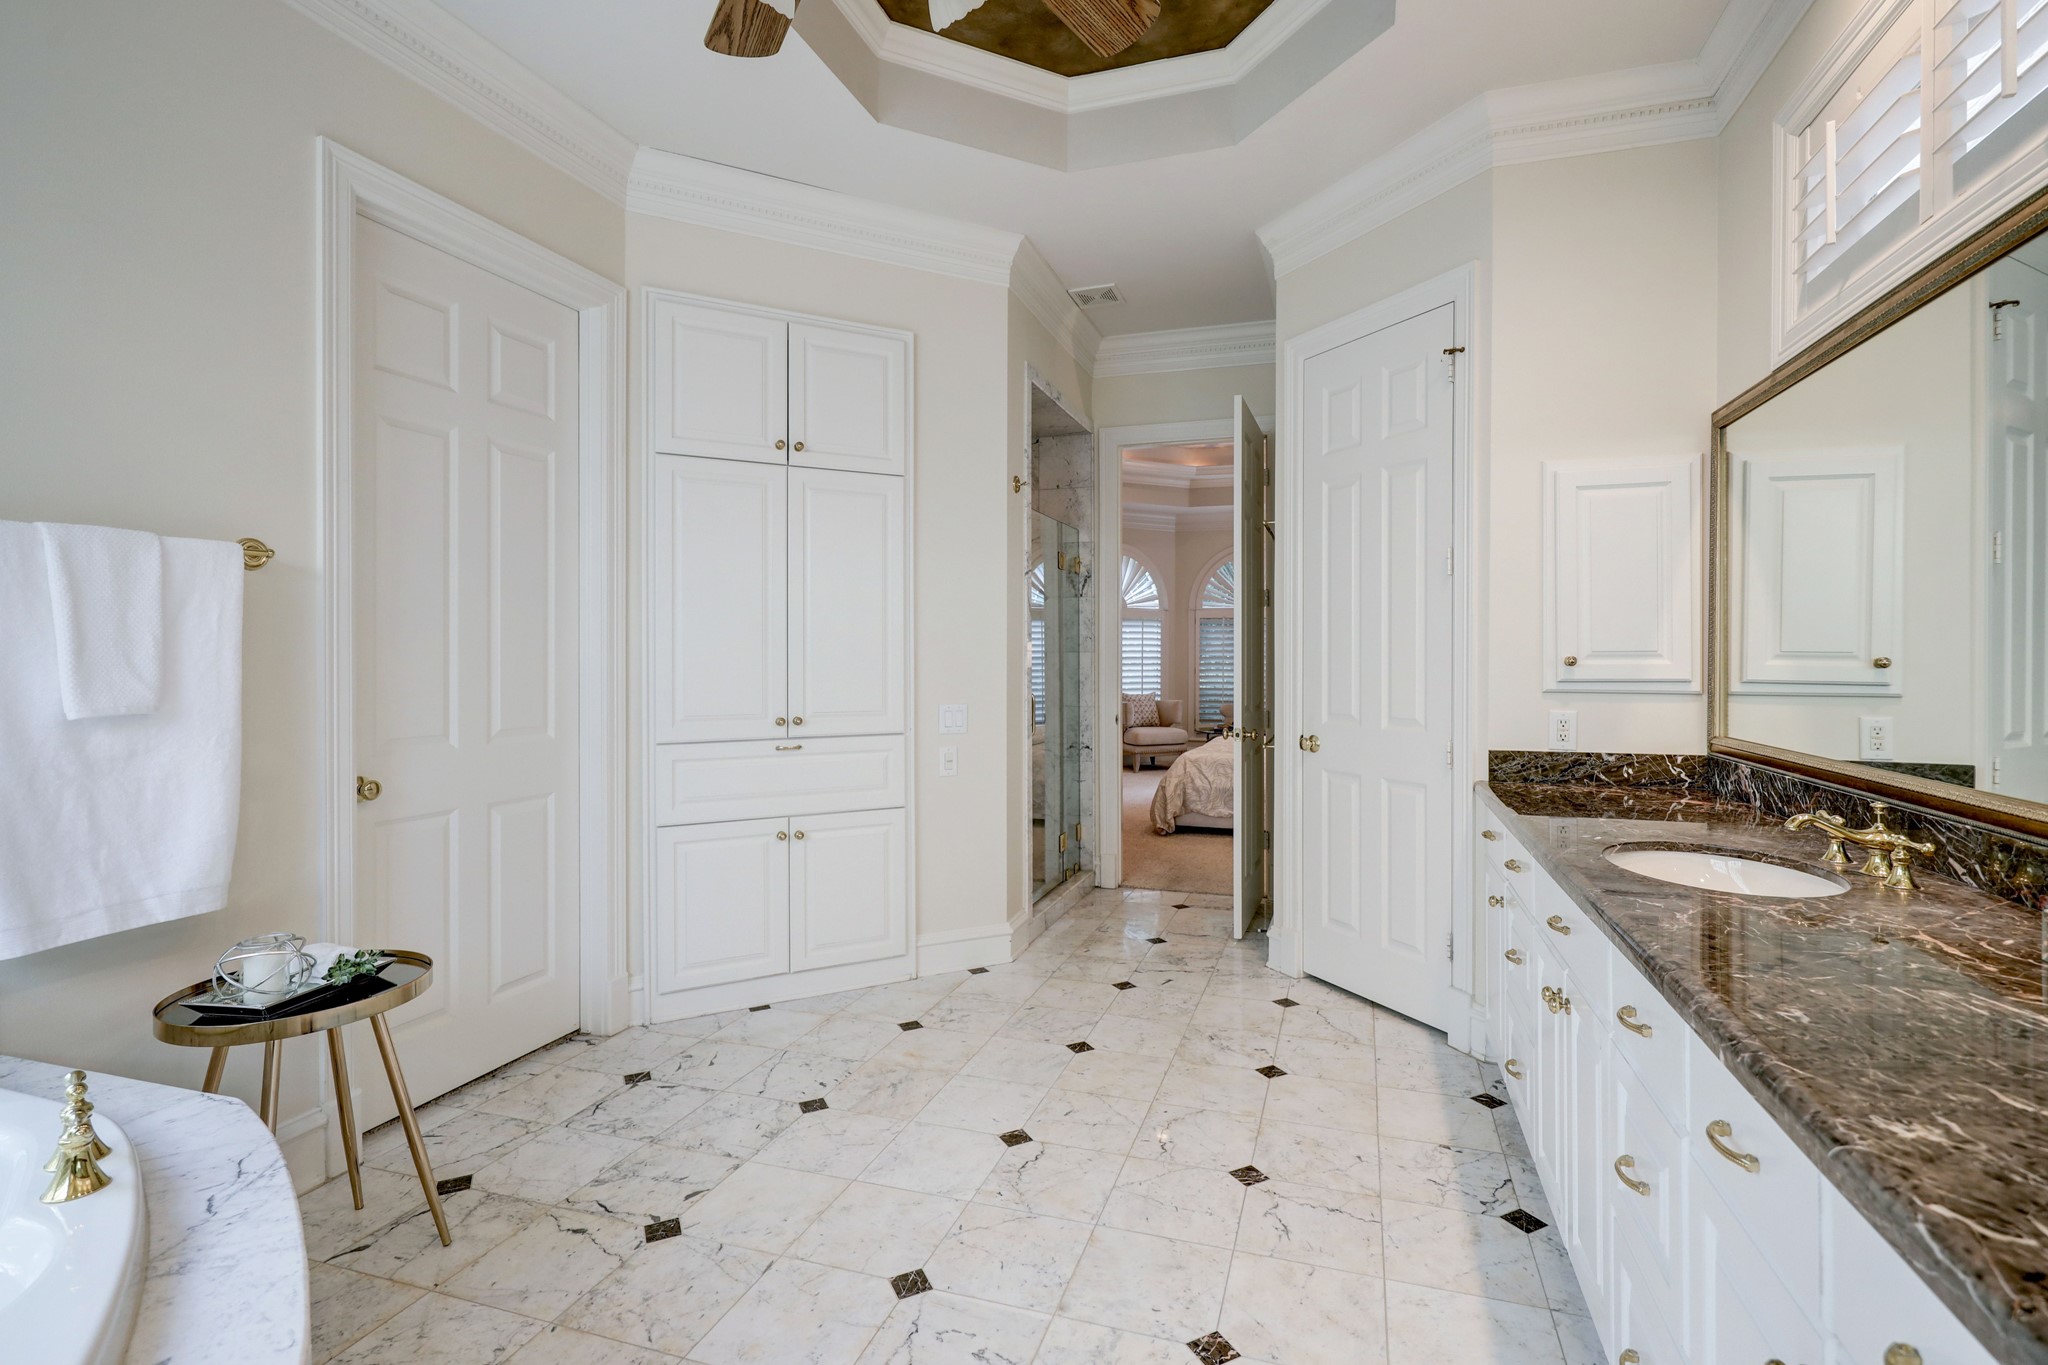 This view shows the Primary Bath looking back into the Primary Suite.  On the right side beyond the vanity area is the enclosed water closet. On the left is the door to the very large walk-in closet and then generous built-ins for towels, sundries, and a hamper.  Behind the built-ins is the separate marble shower.